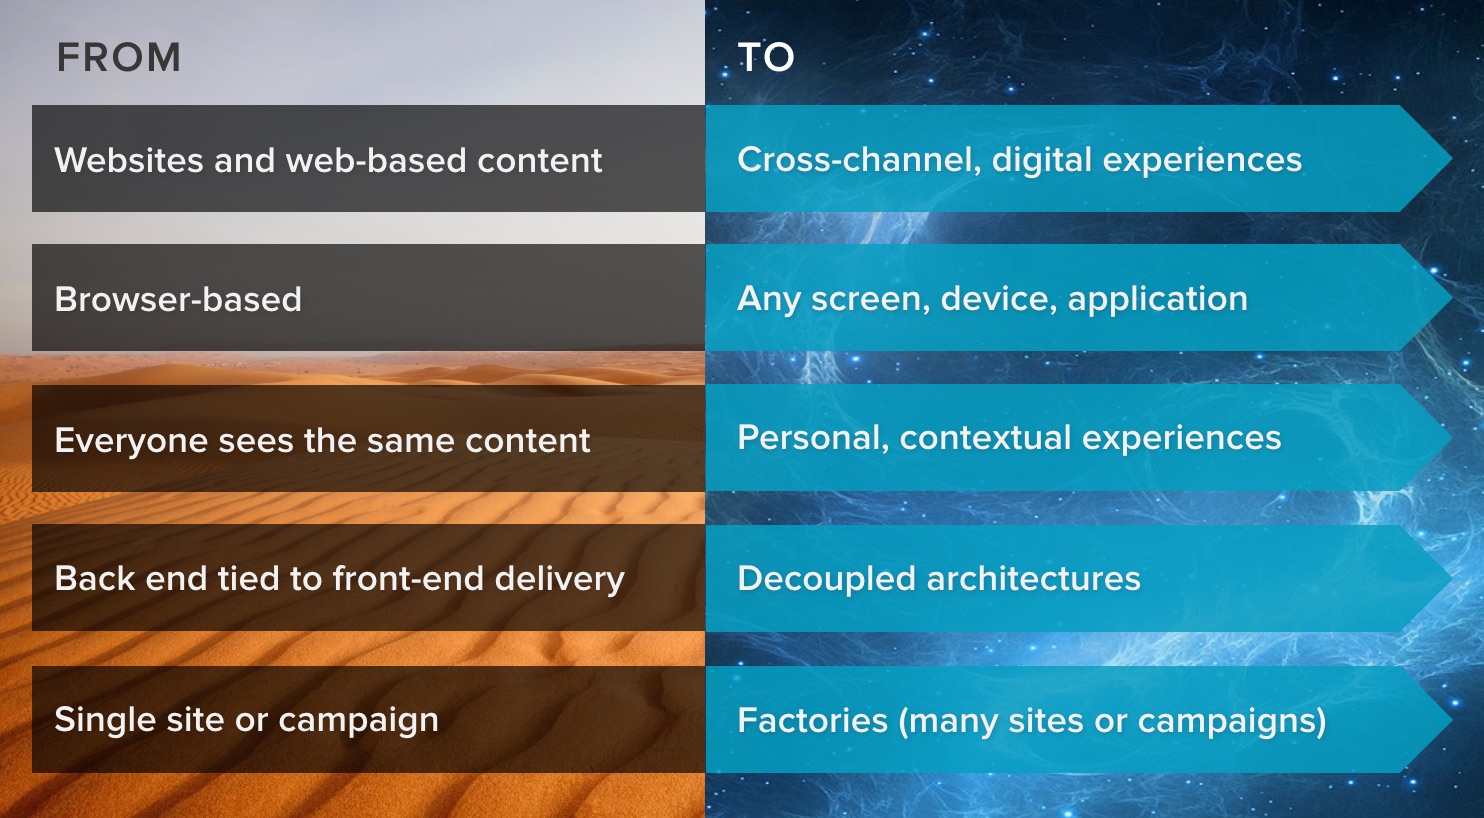 The image displays a comparison between old and new technology trends. On the left, labeled 'From,' it lists 'Websites and web-based content,' 'Browser-based,' 'Everyone sees the same content,' 'Back end tied to front-end delivery,' and 'Single site or campaign.' On the right, labeled 'To,' it reads 'Cross-channel, digital experiences,' 'Any screen, device, application,' 'Personal, contextual experiences,' 'Decoupled architectures,' and 'Factories (many sites or campaigns)'.